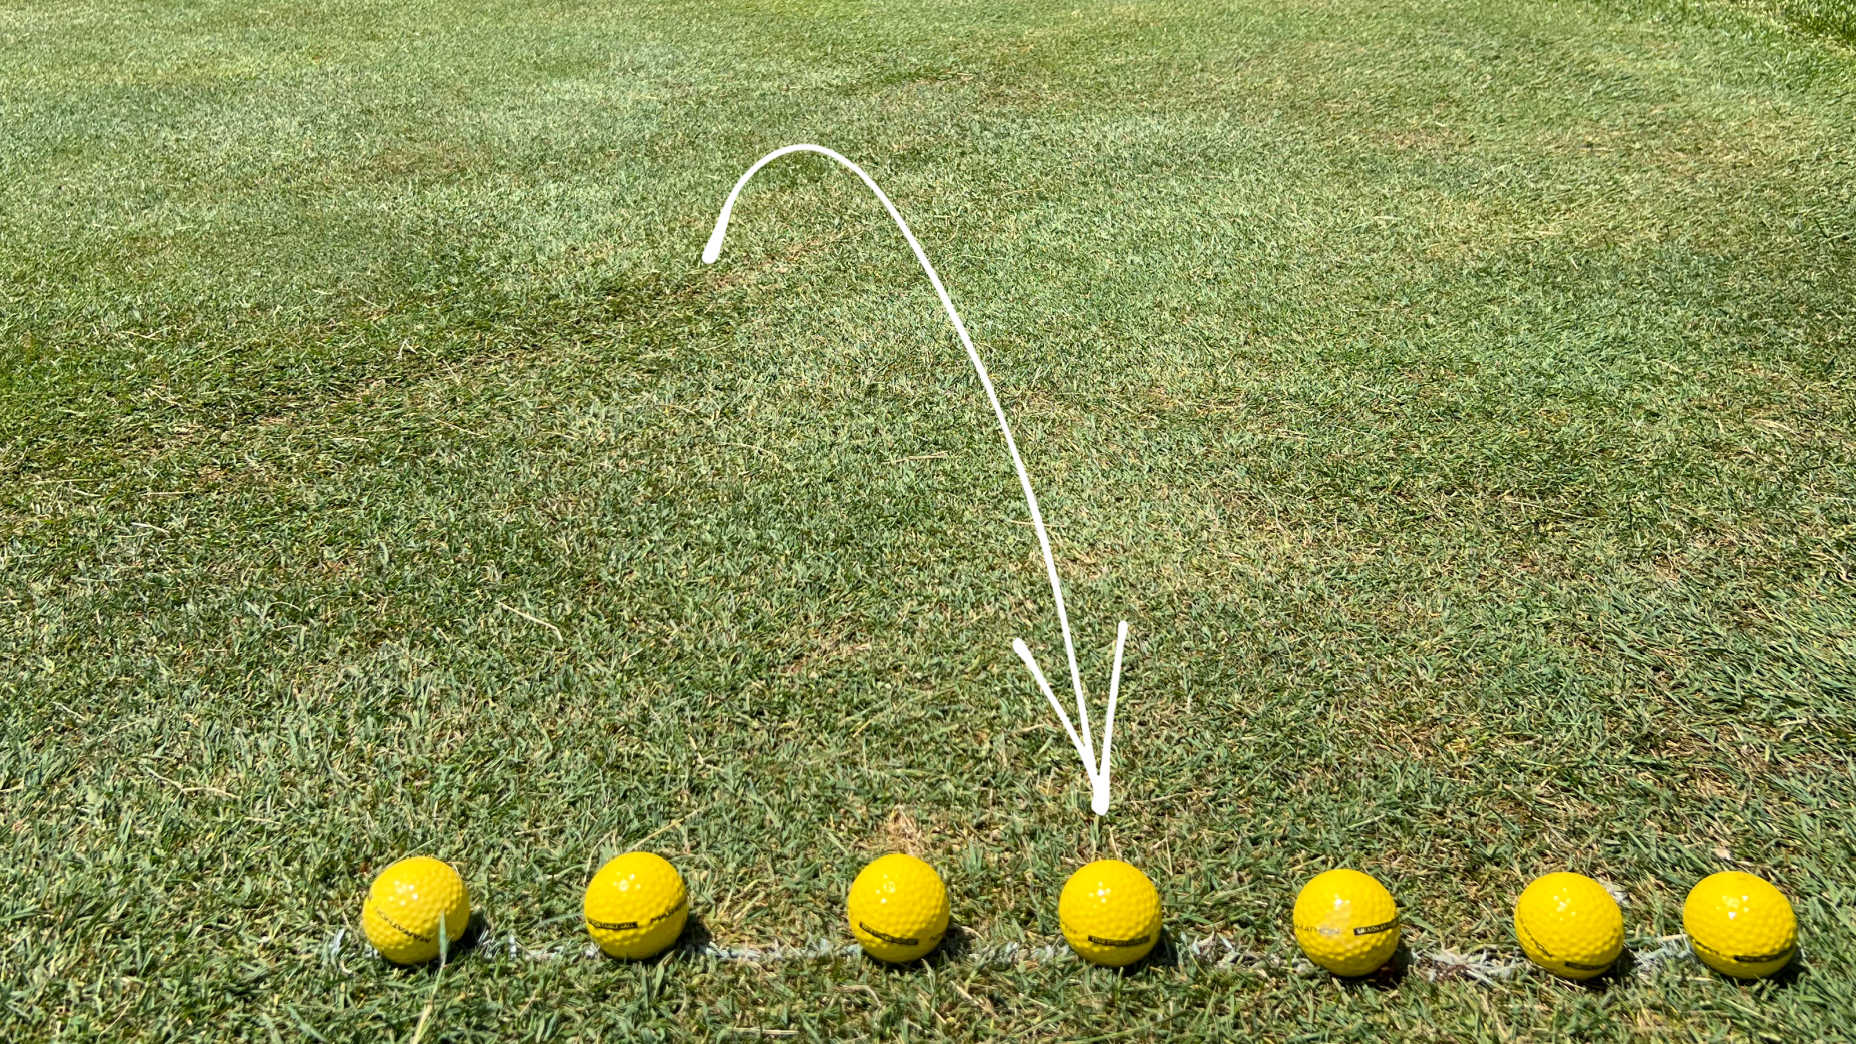 This fun (but tricky!) range game is a great way to test your iron consistency